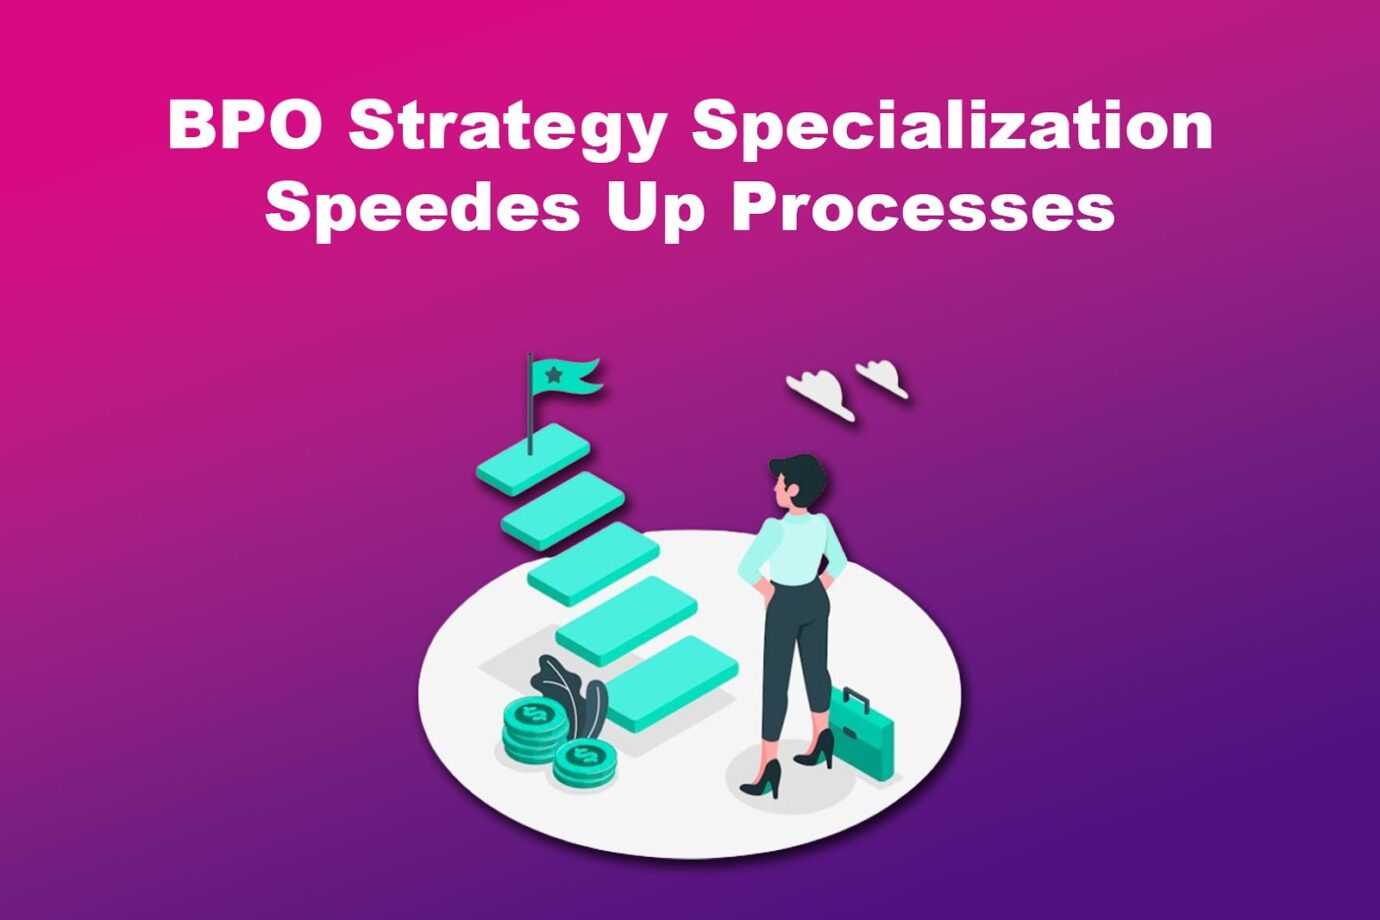 BPO Strategy Specialization Speedes Up Processes